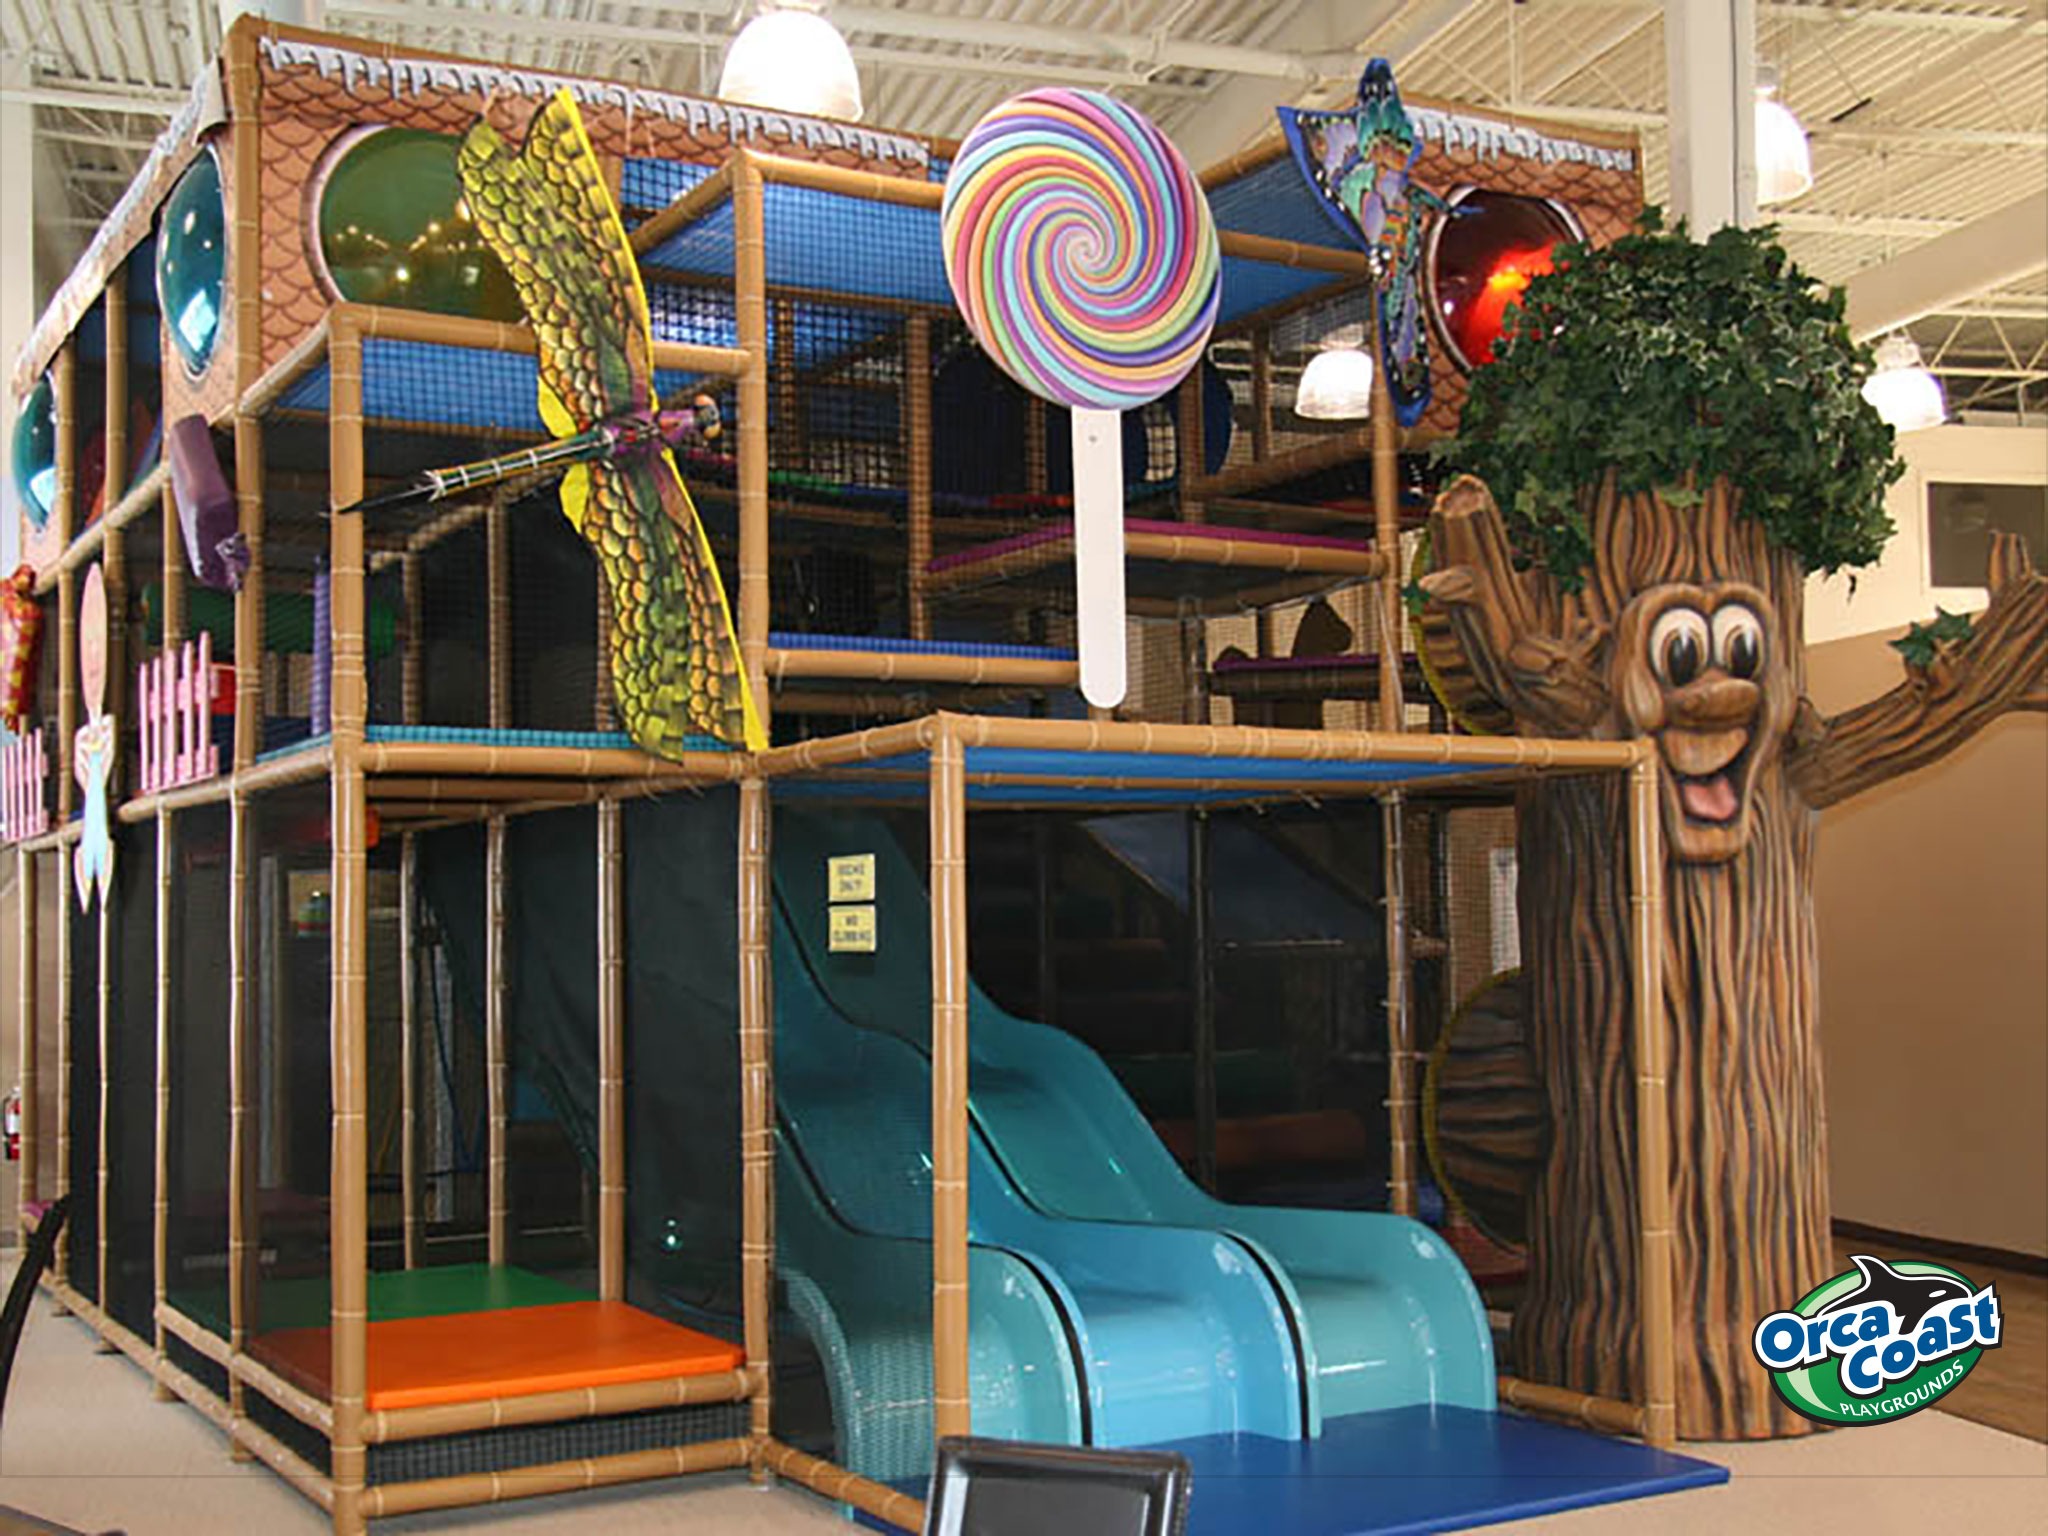 Kin-R-Gee Family Center: Whimsical Forest Play in Concord, ON